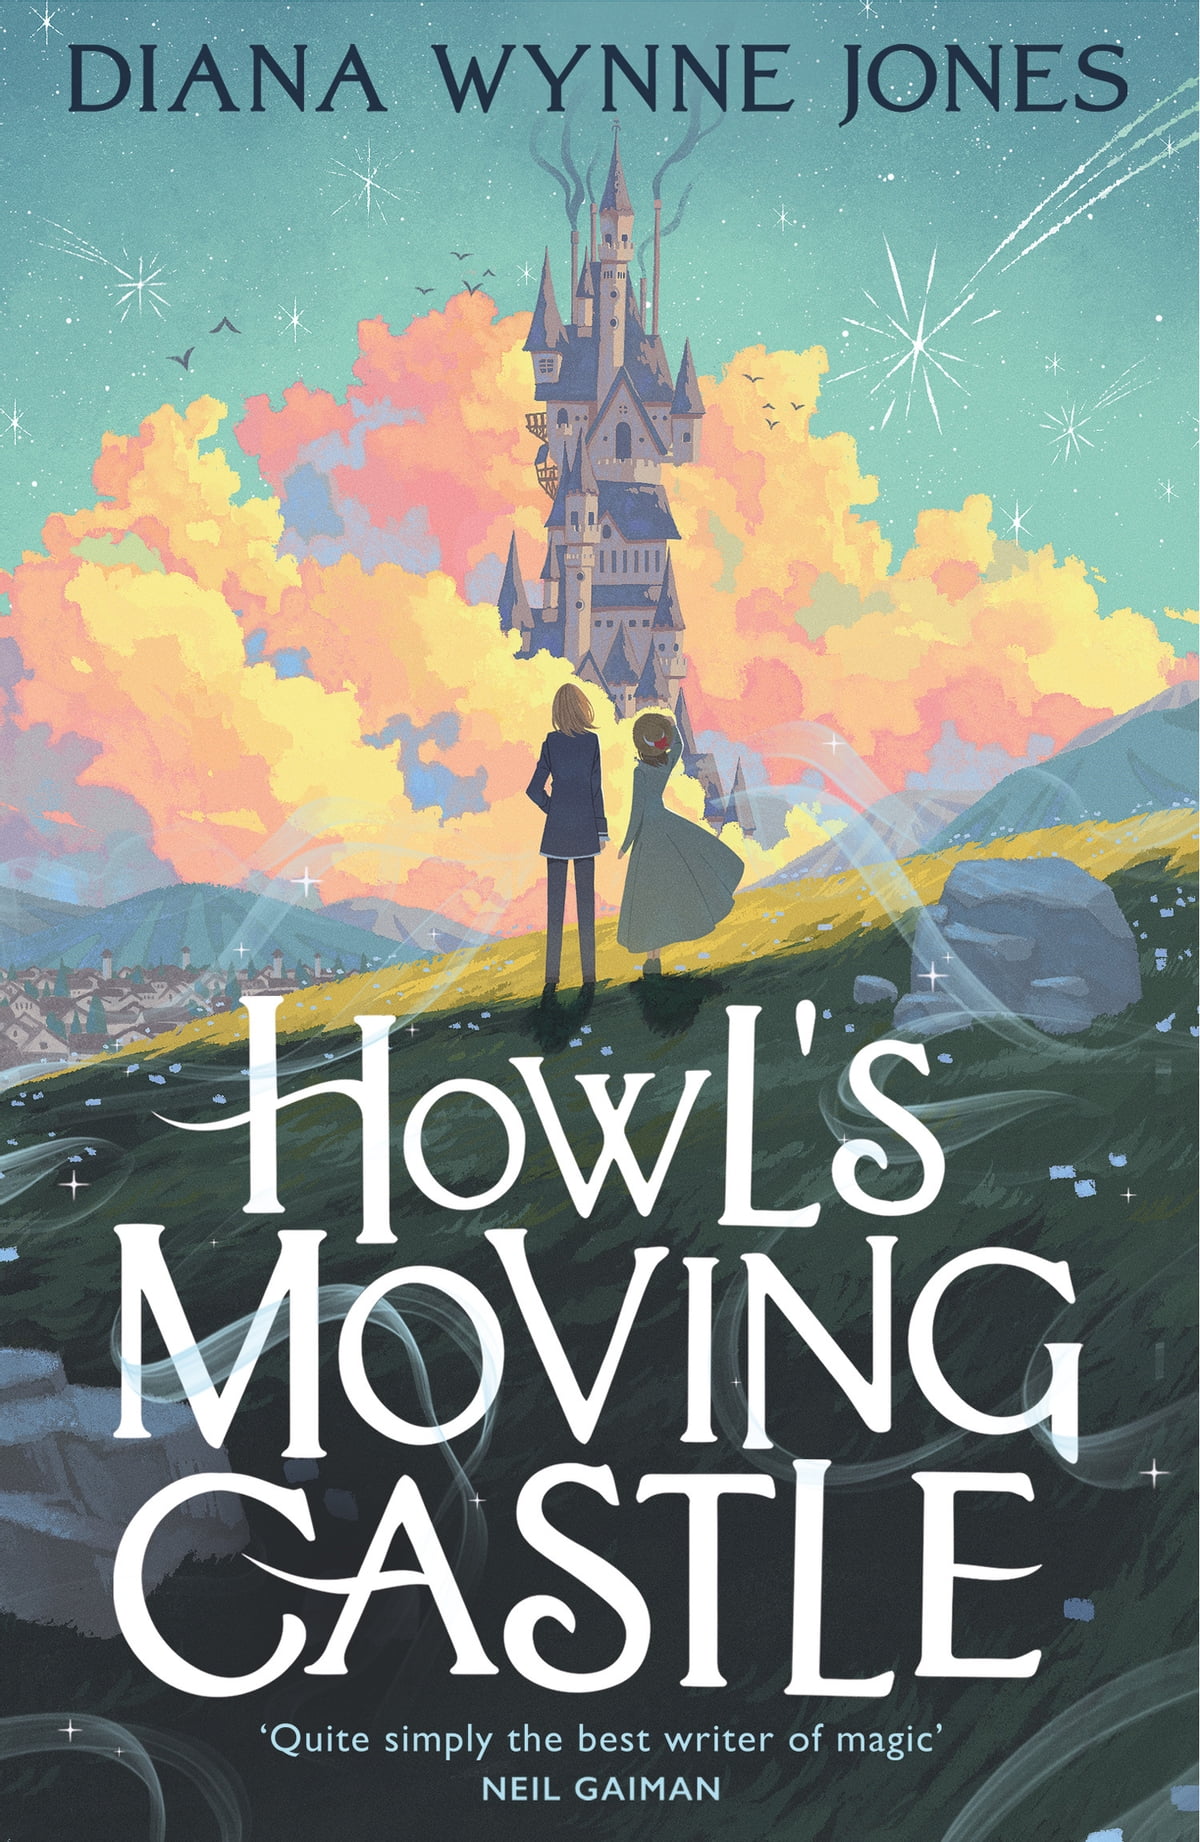 who wrote howl's moving castle